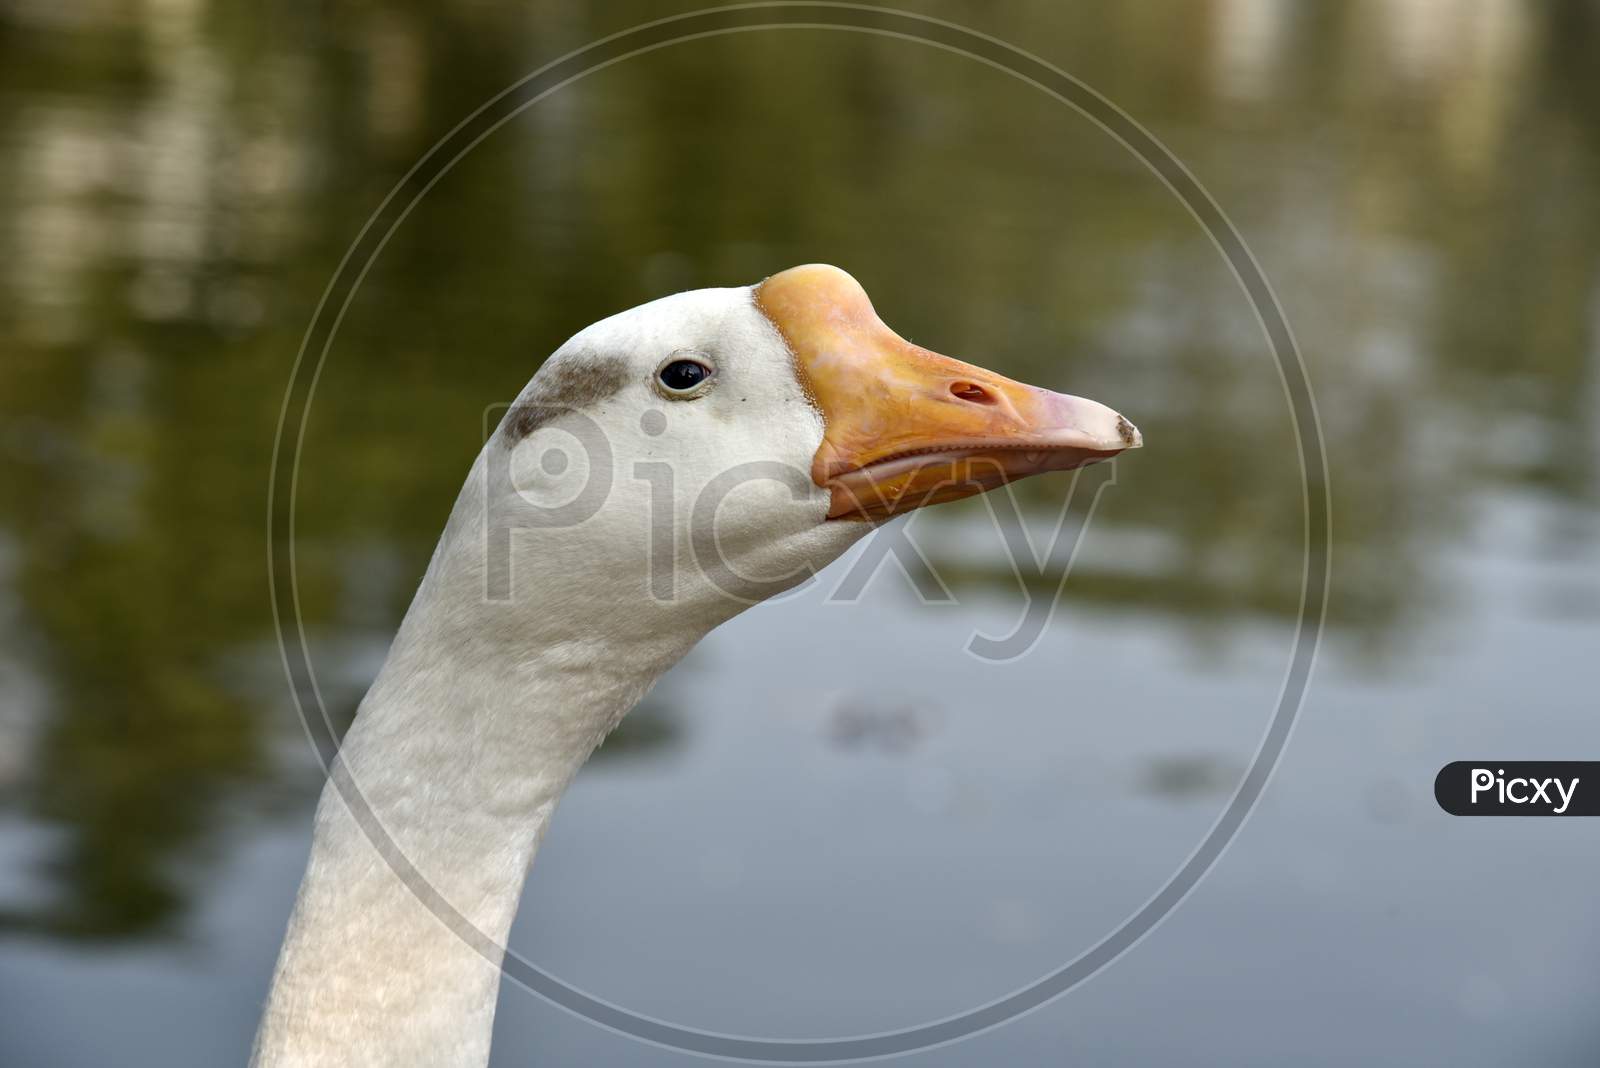 Head And Neck Of A Goose